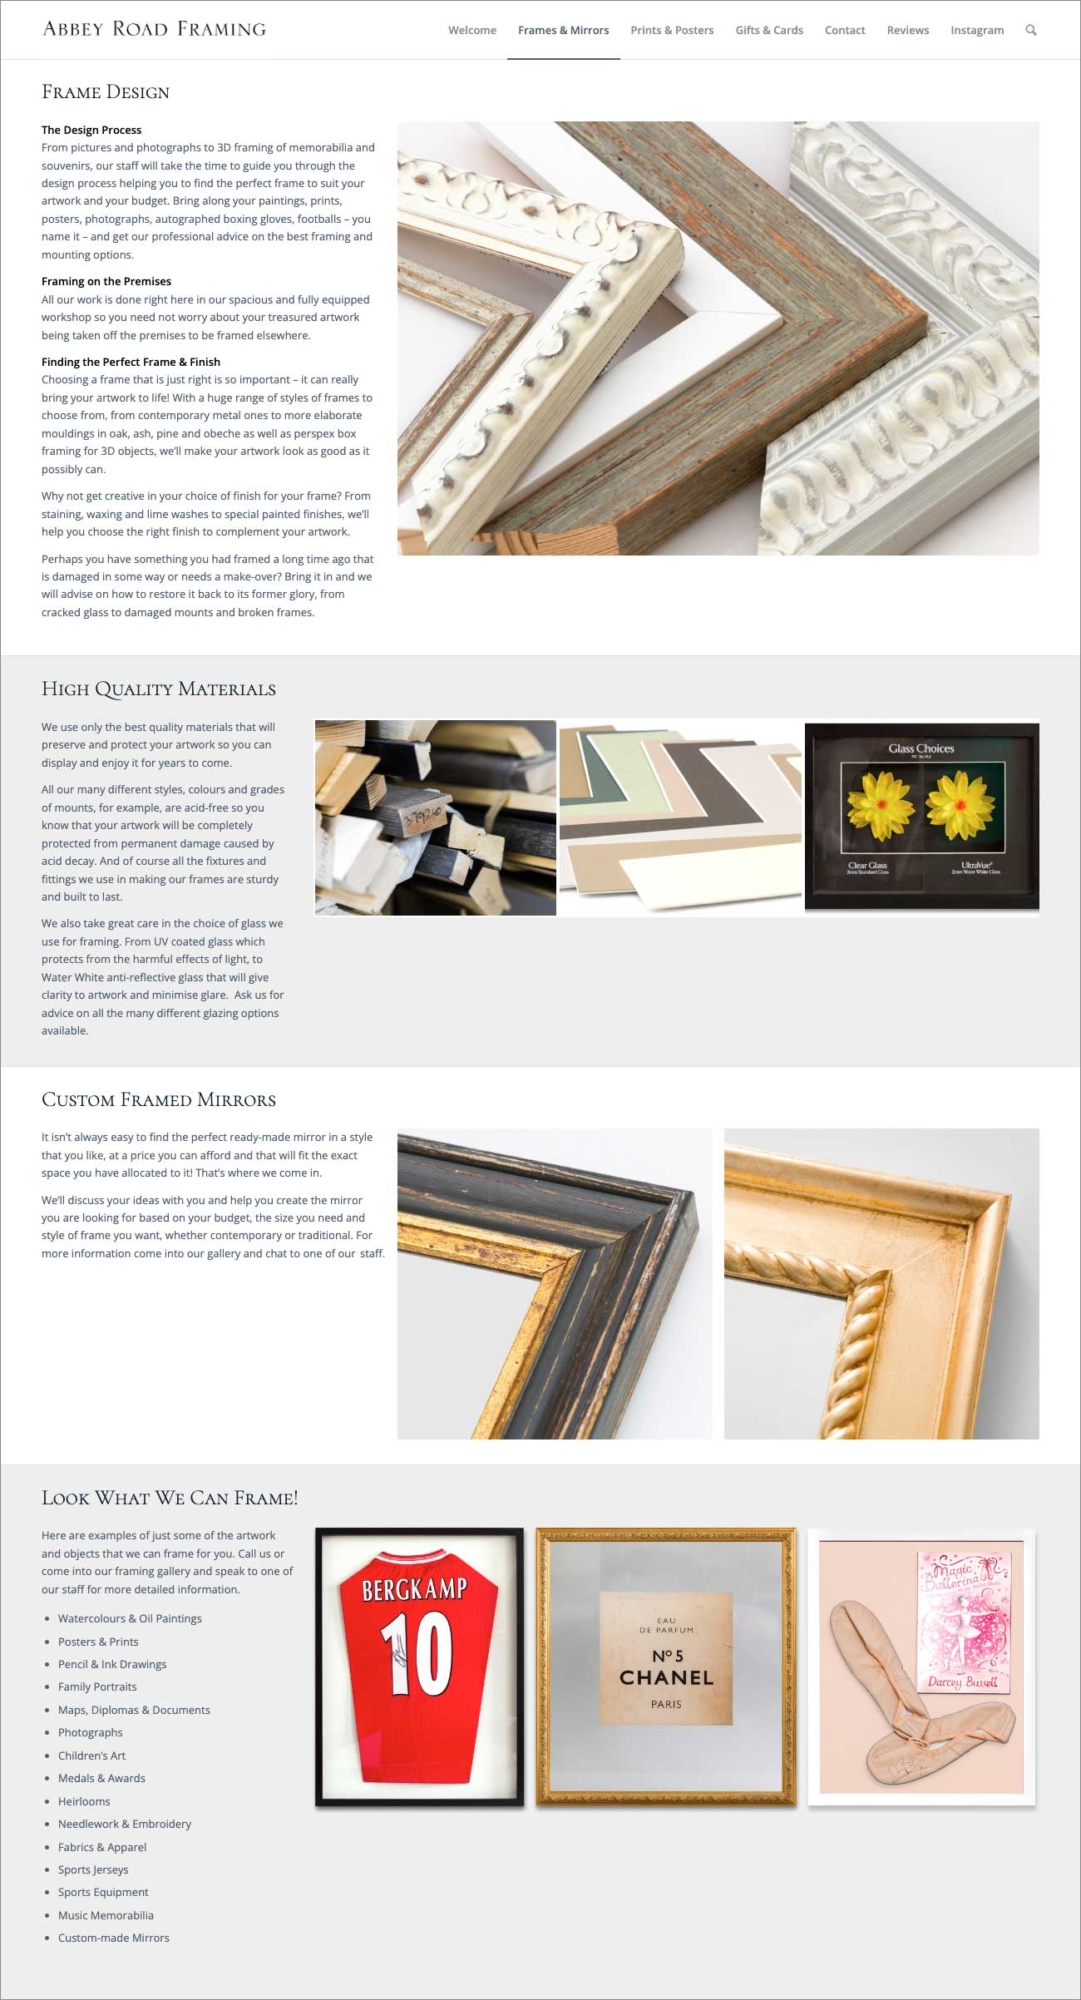 Abbey Road Framing Website Frames and Mirrors